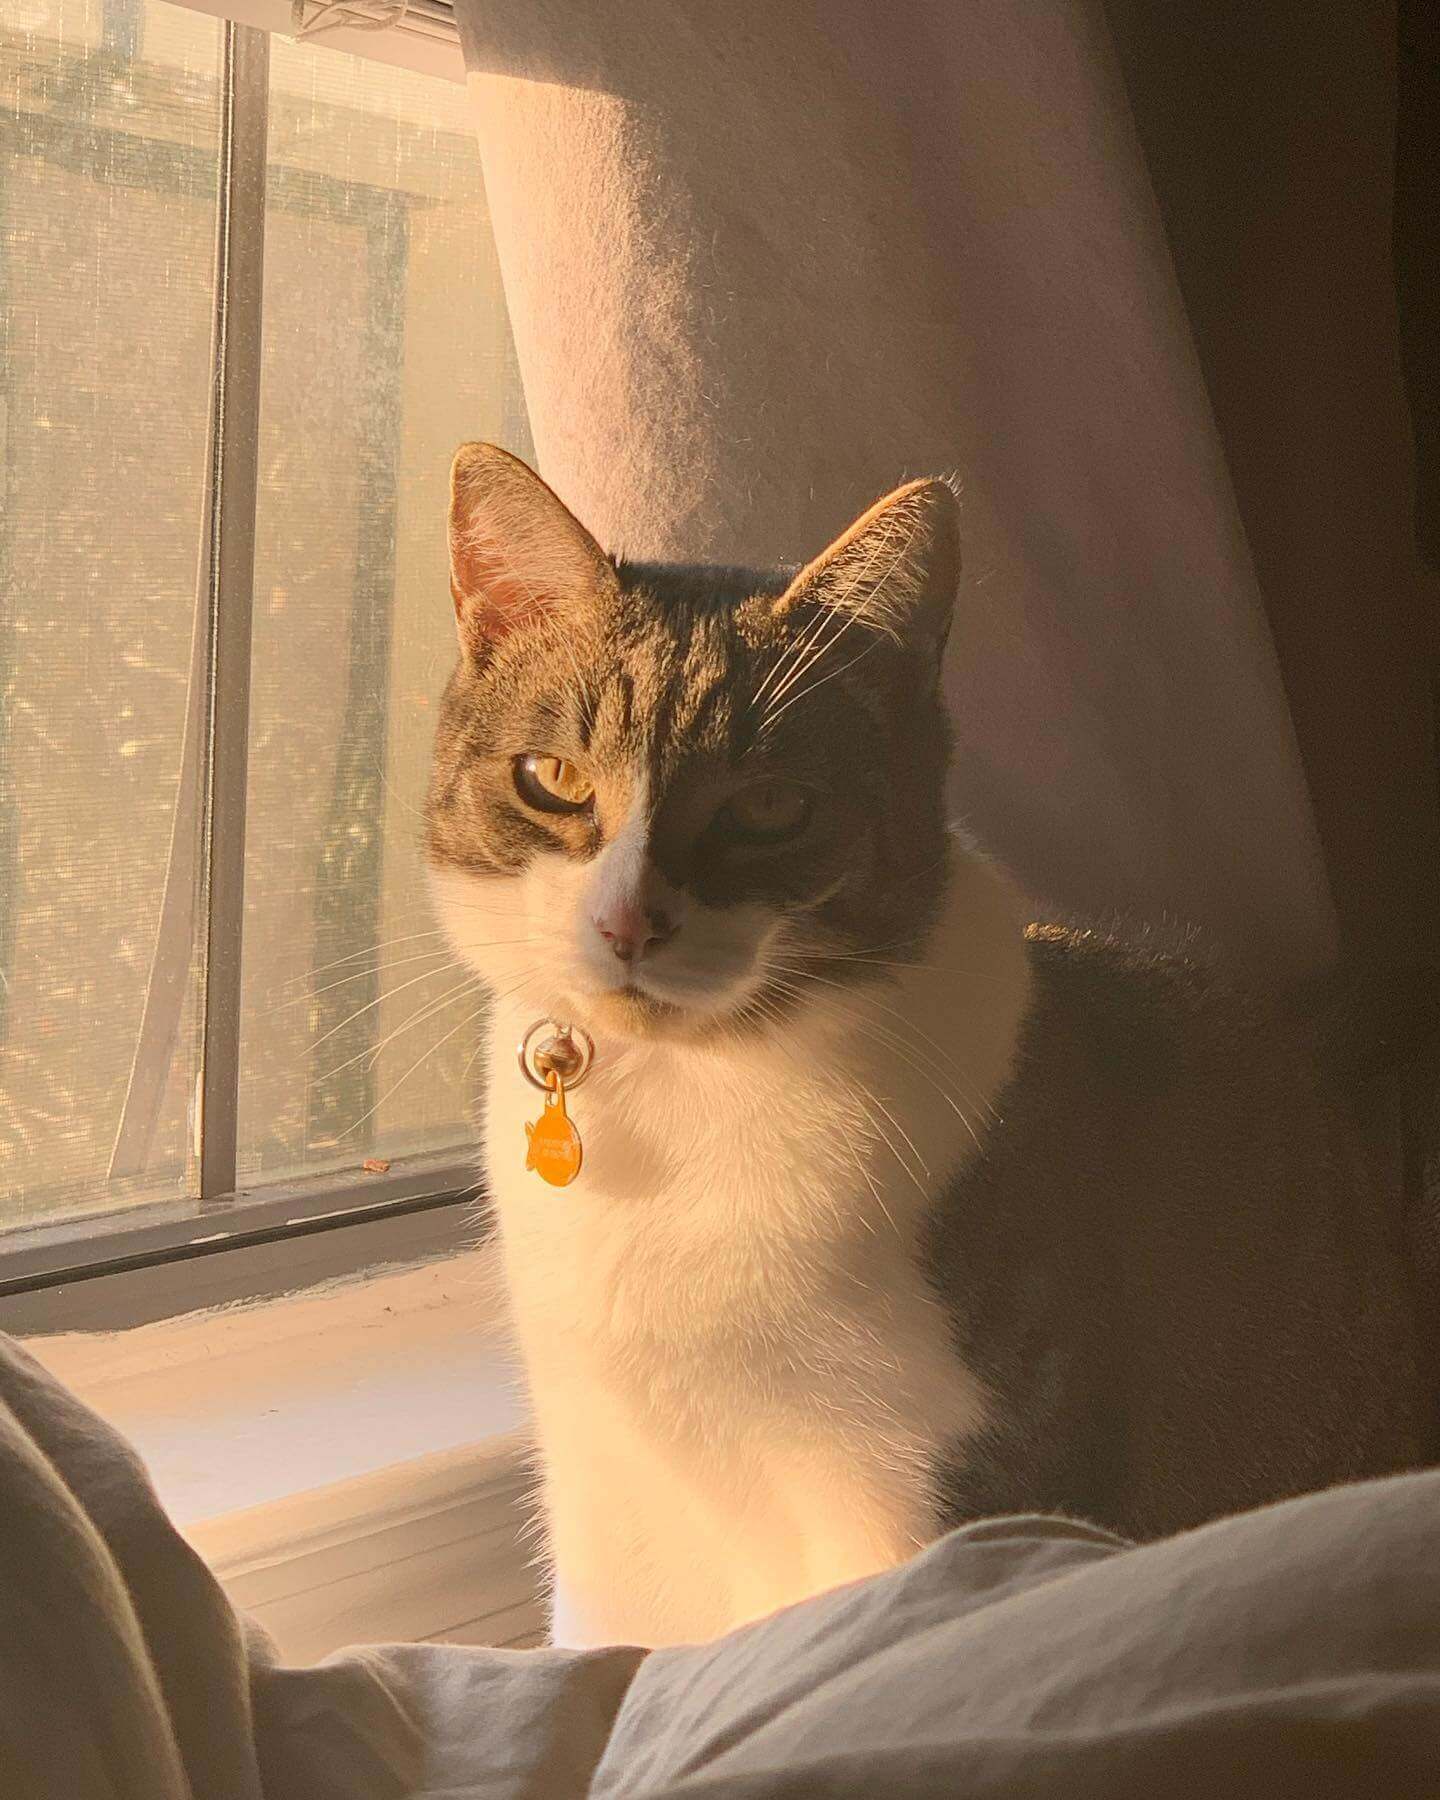 My cat Bento in front of a sunset window